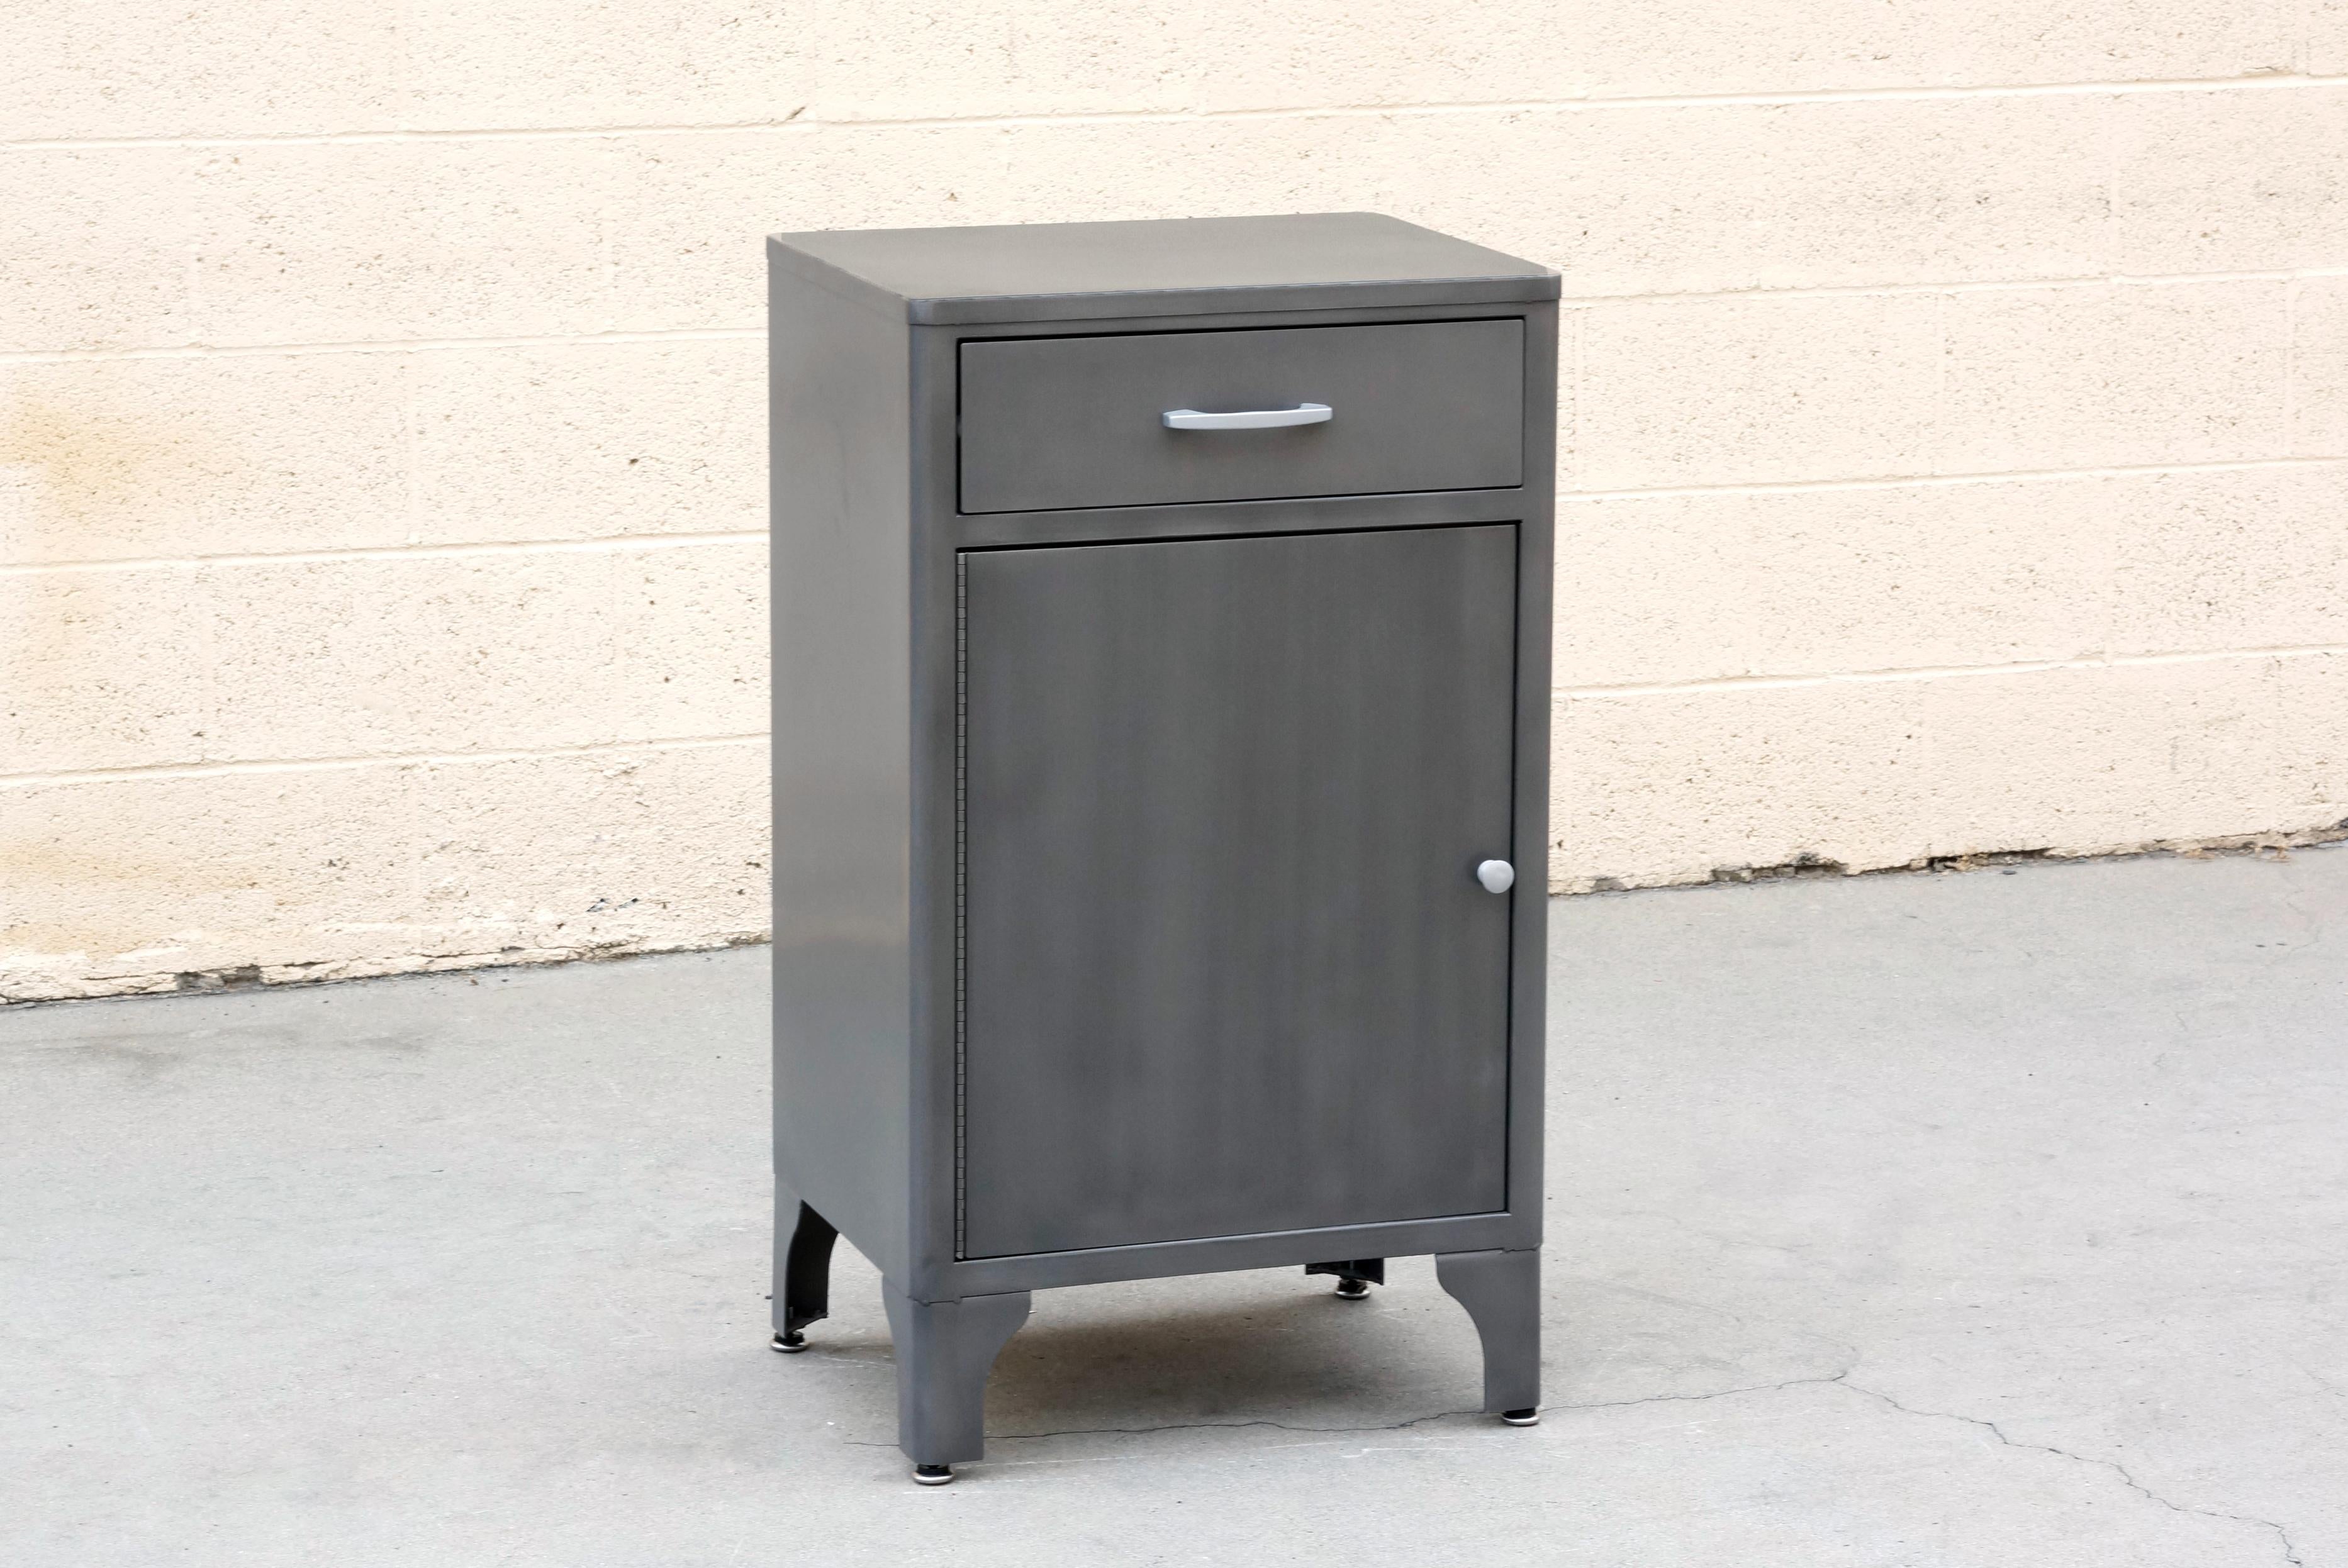 Classic 1950s Industrial medical cabinet refinished in a natural steel powder coat. This quality-made steel unit features single drawer and magnetized cabinet door with double shelves. Original hardware, refinished. 

Dimensions: 20